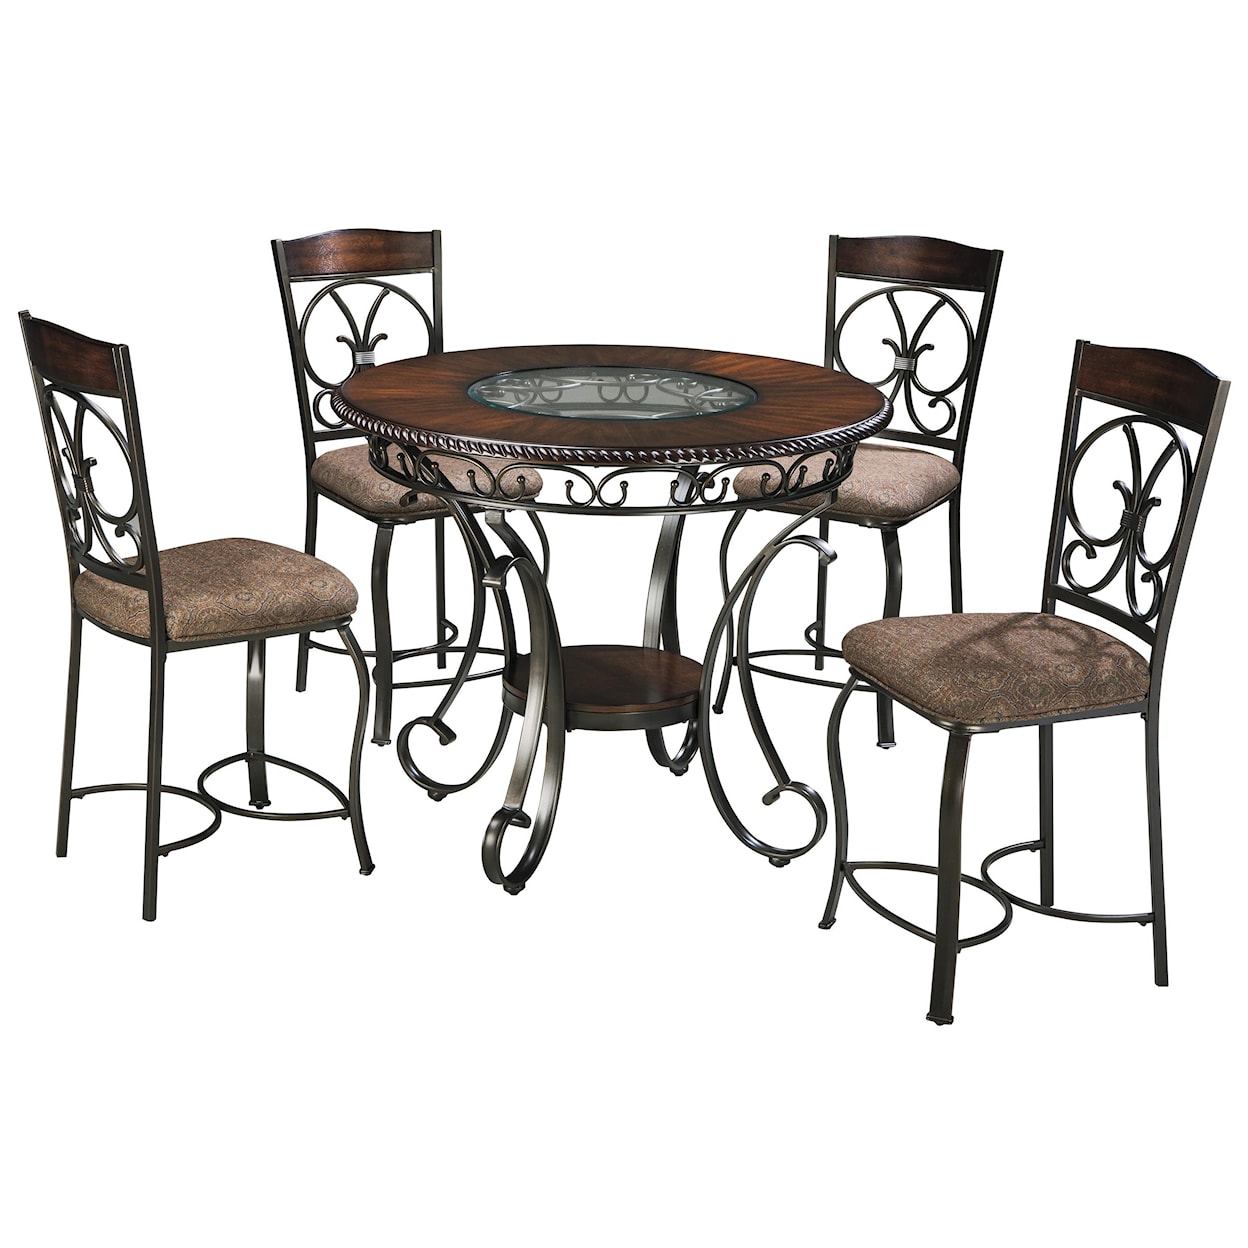 Signature Design by Ashley Glambrey 5pc Dining Room Group